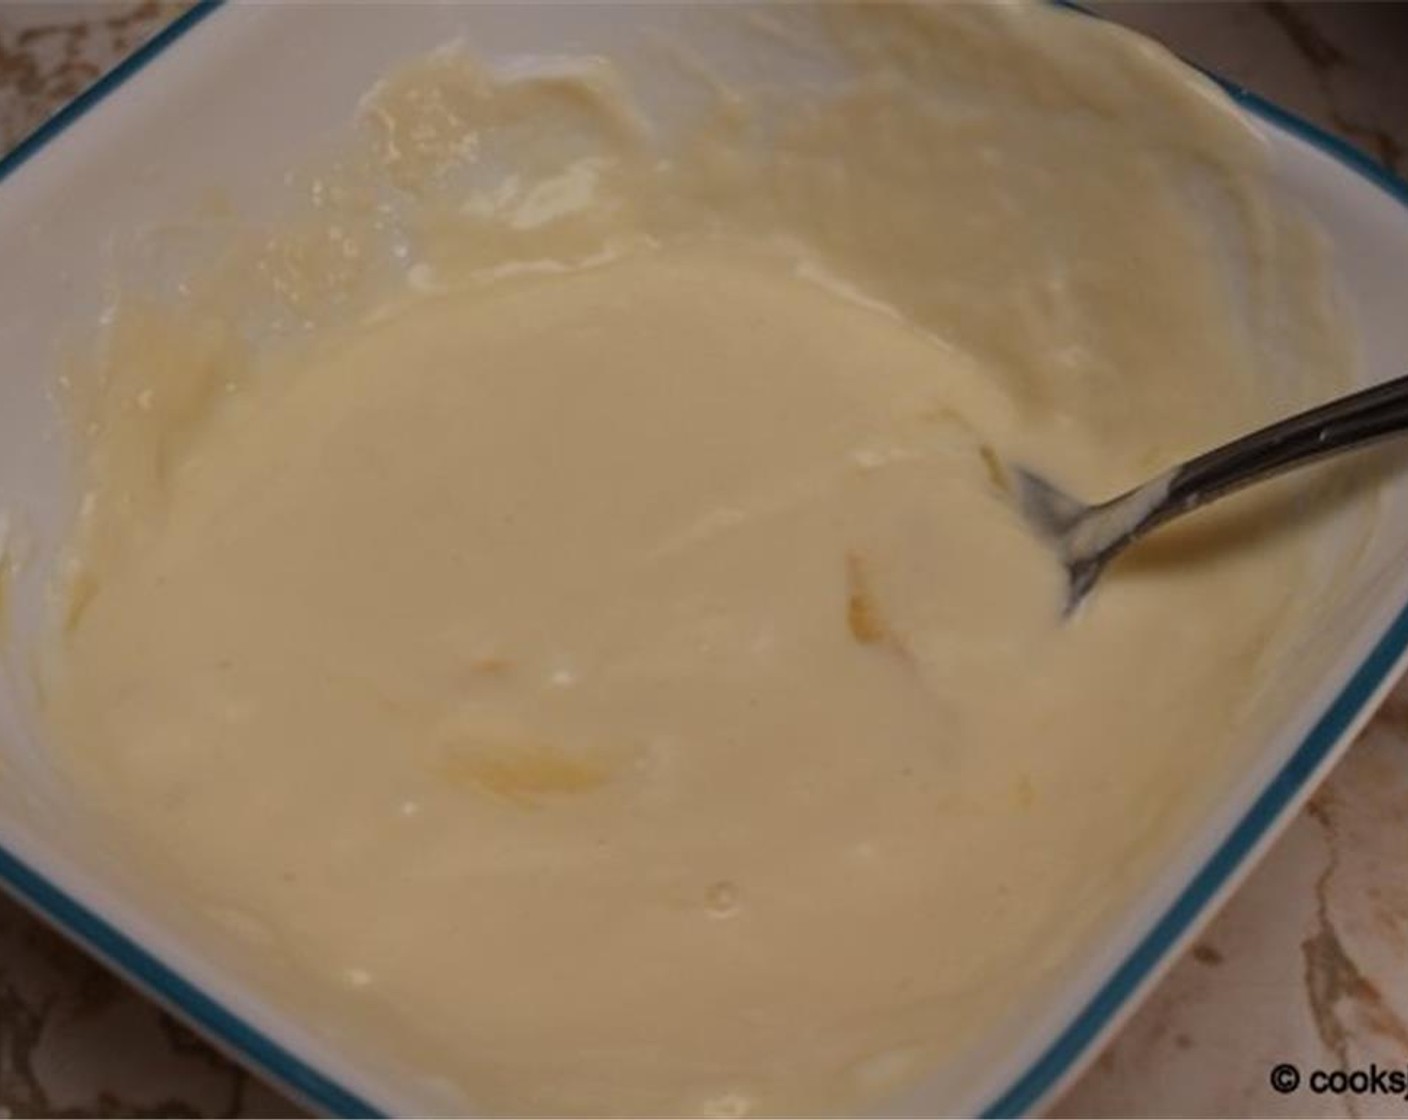 step 1 Mix the Egg (1), Oil (1/4 cup), and Greek Yogurt (1/2 cup).